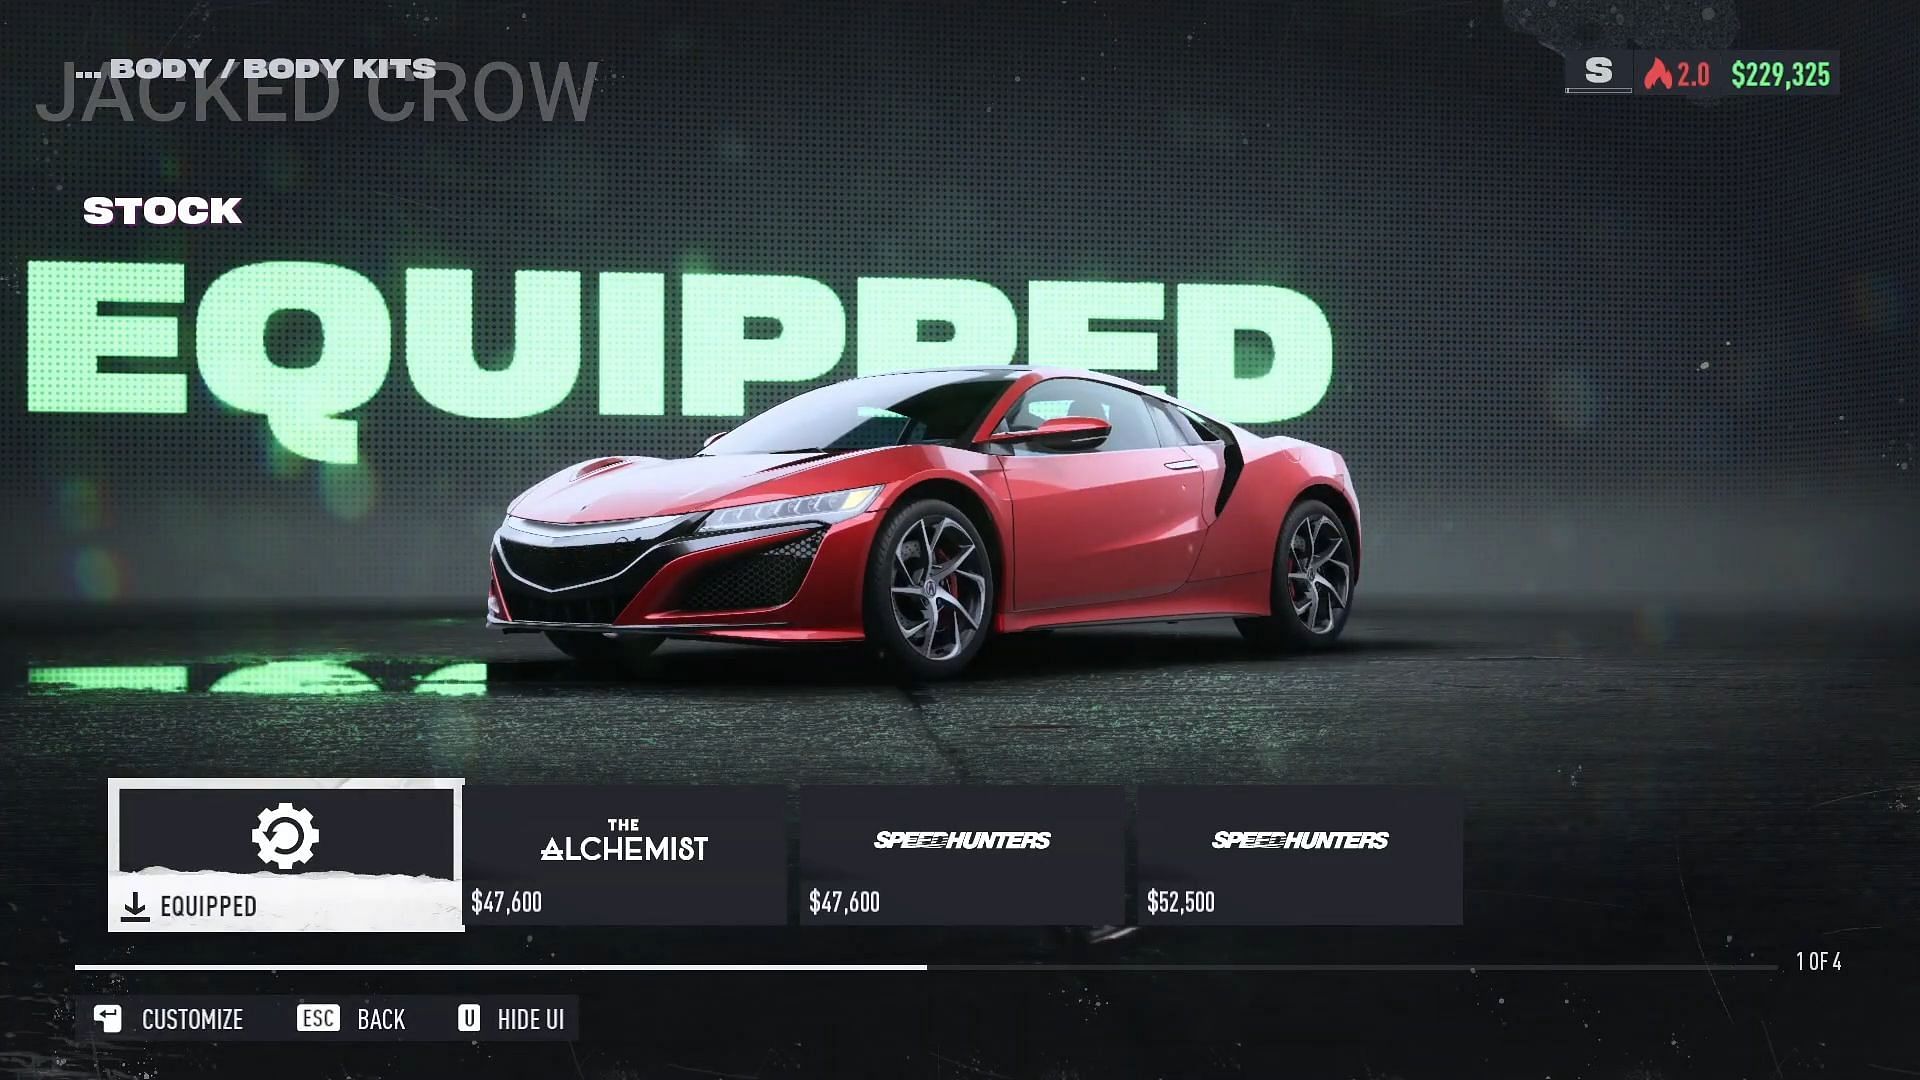 The Acura NSX 2017 in all its glory (Image via YouTube/Jacked Crow)